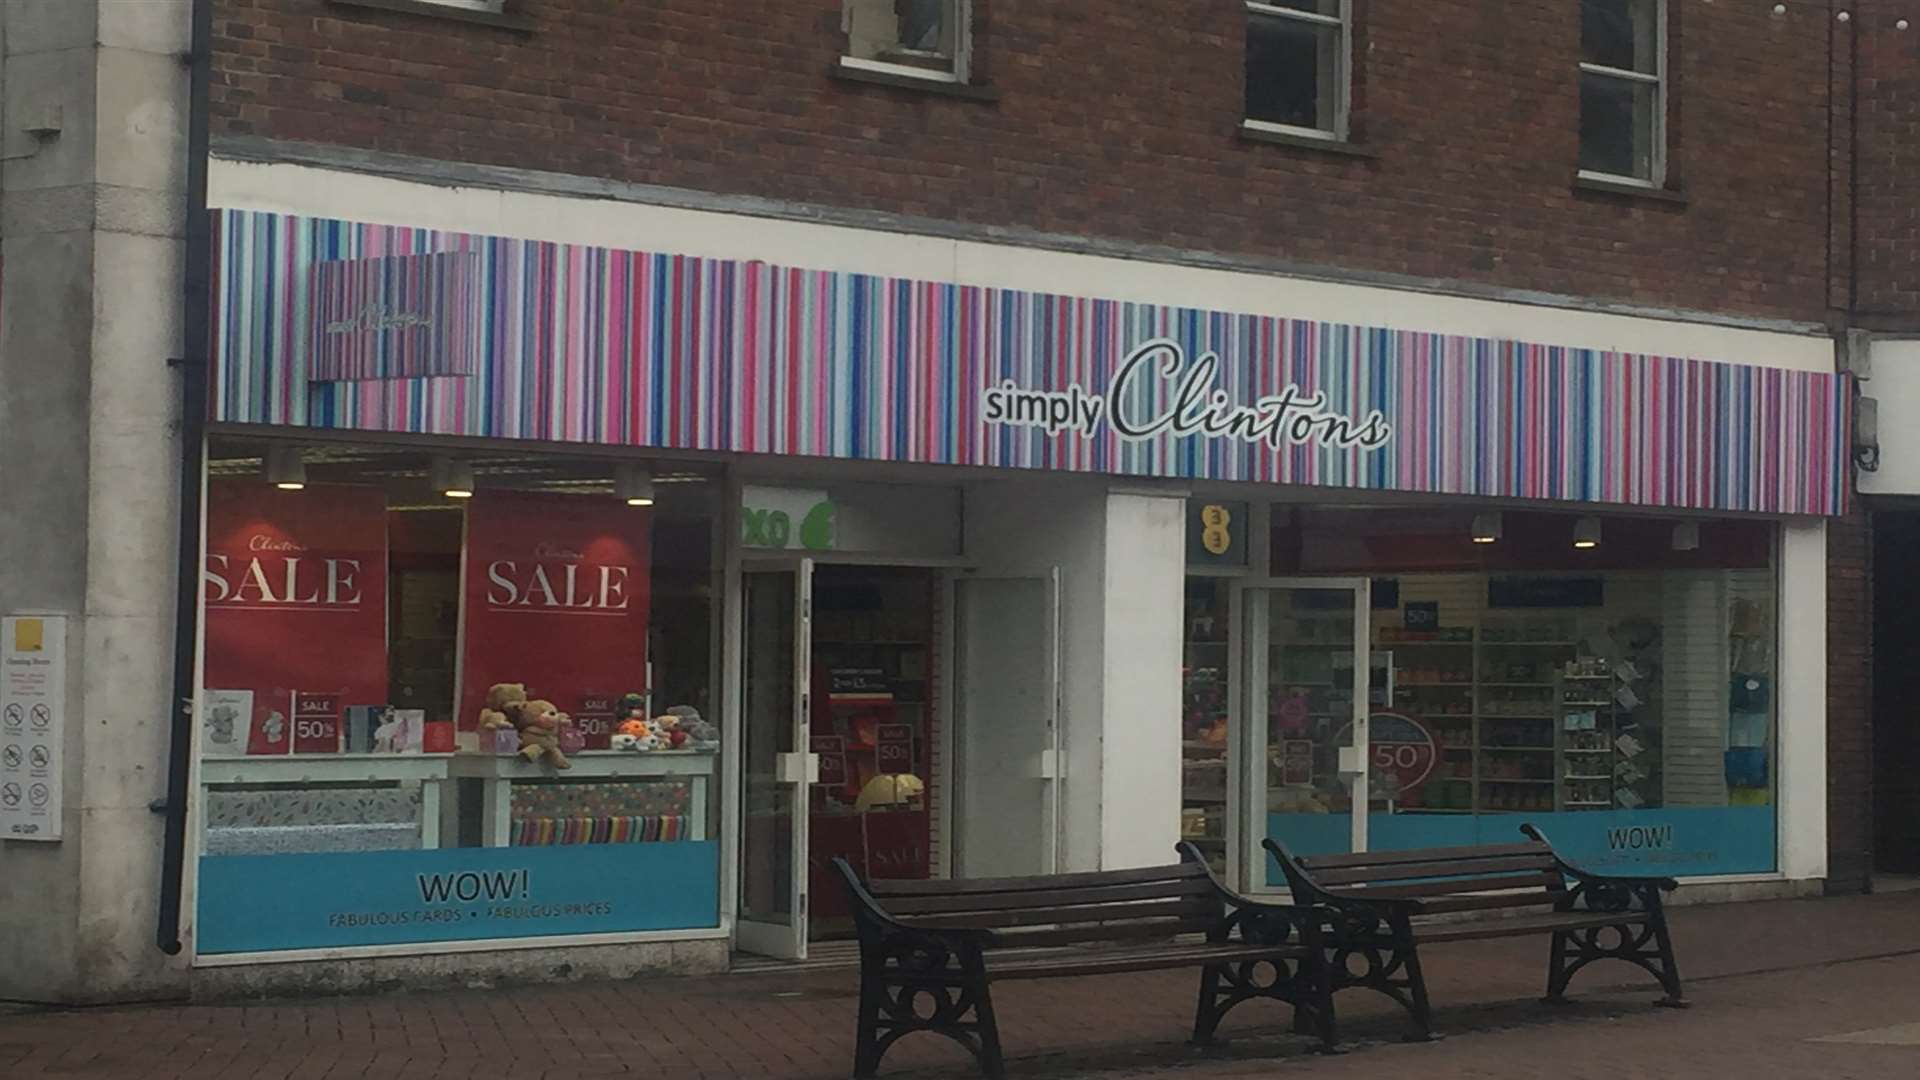 Clintons card shop in Ashford High Street is set to close